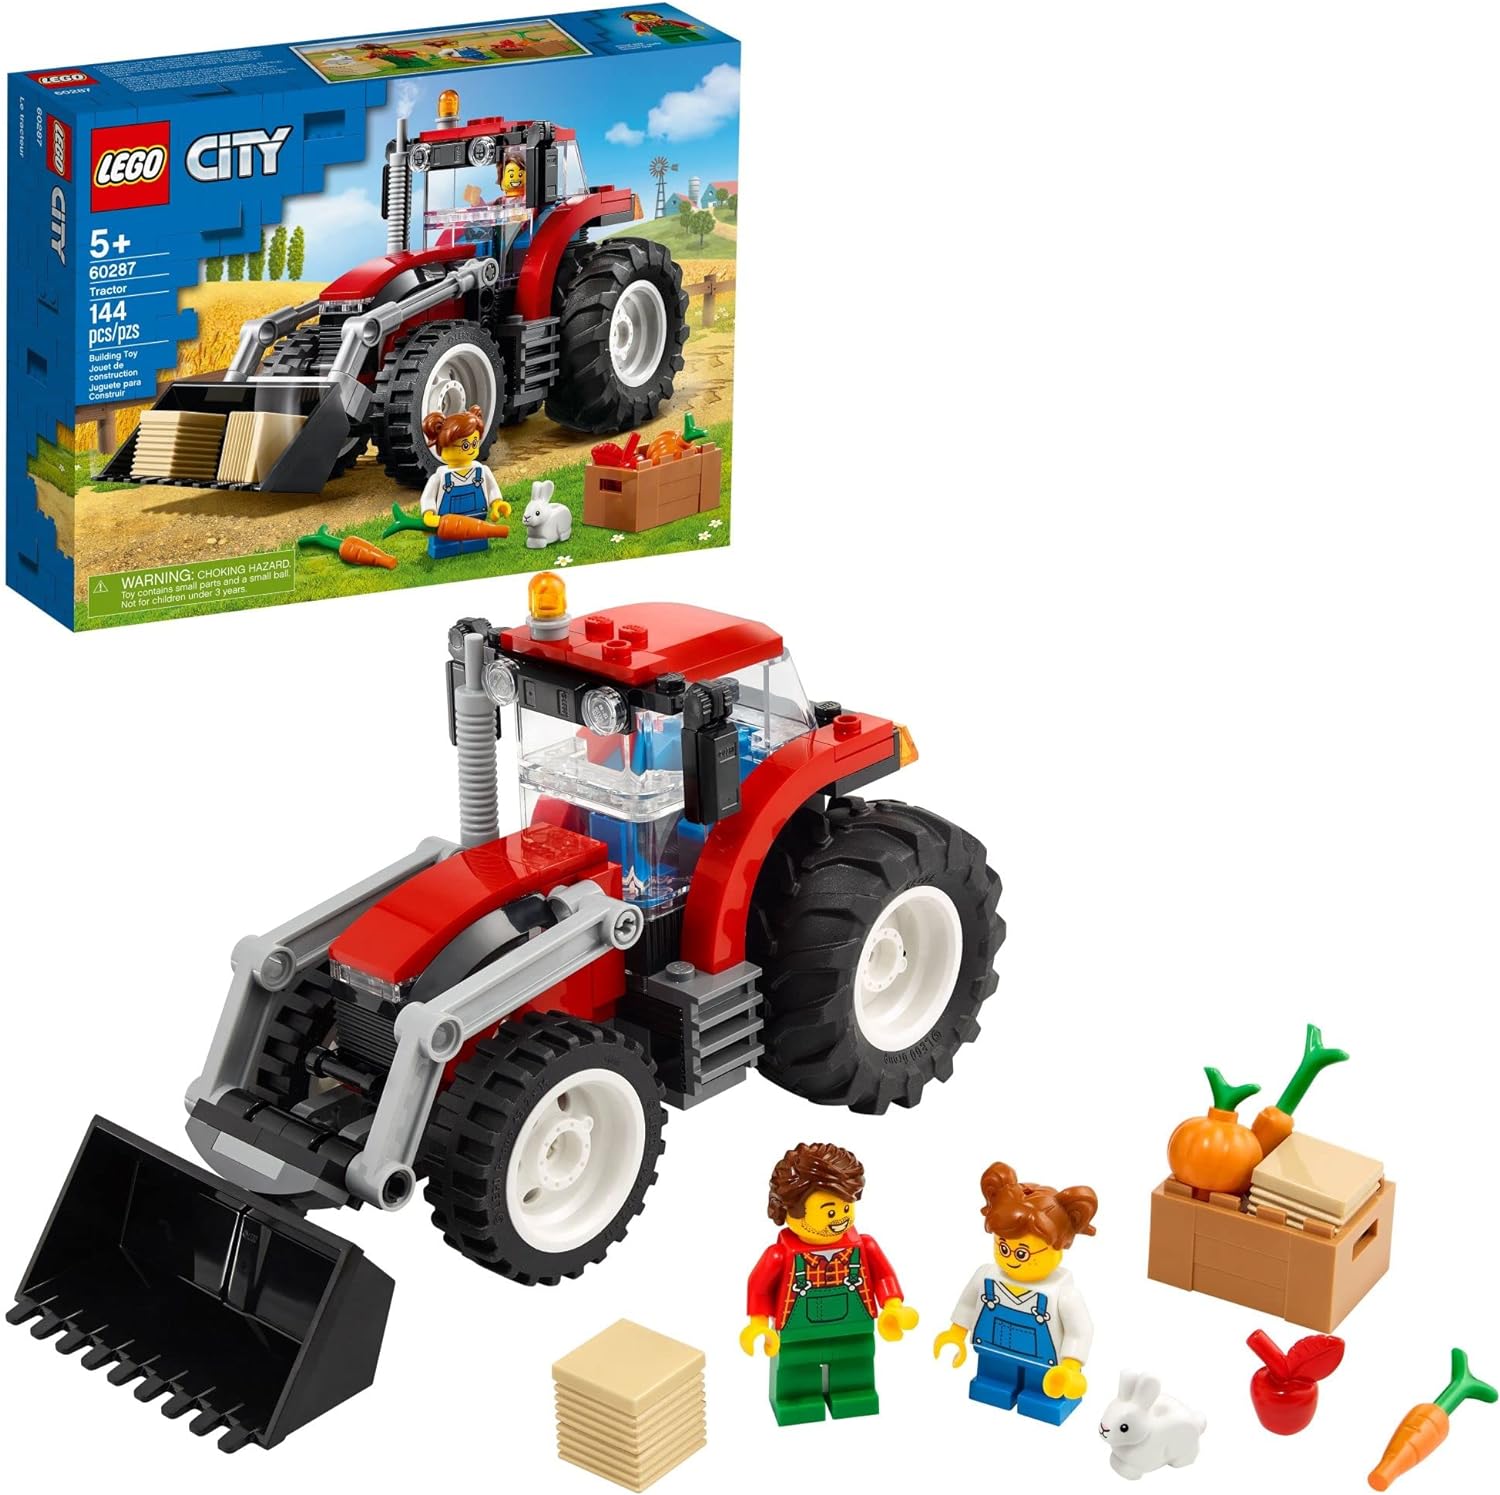 LEGO City Great Vehicles Tractor Set